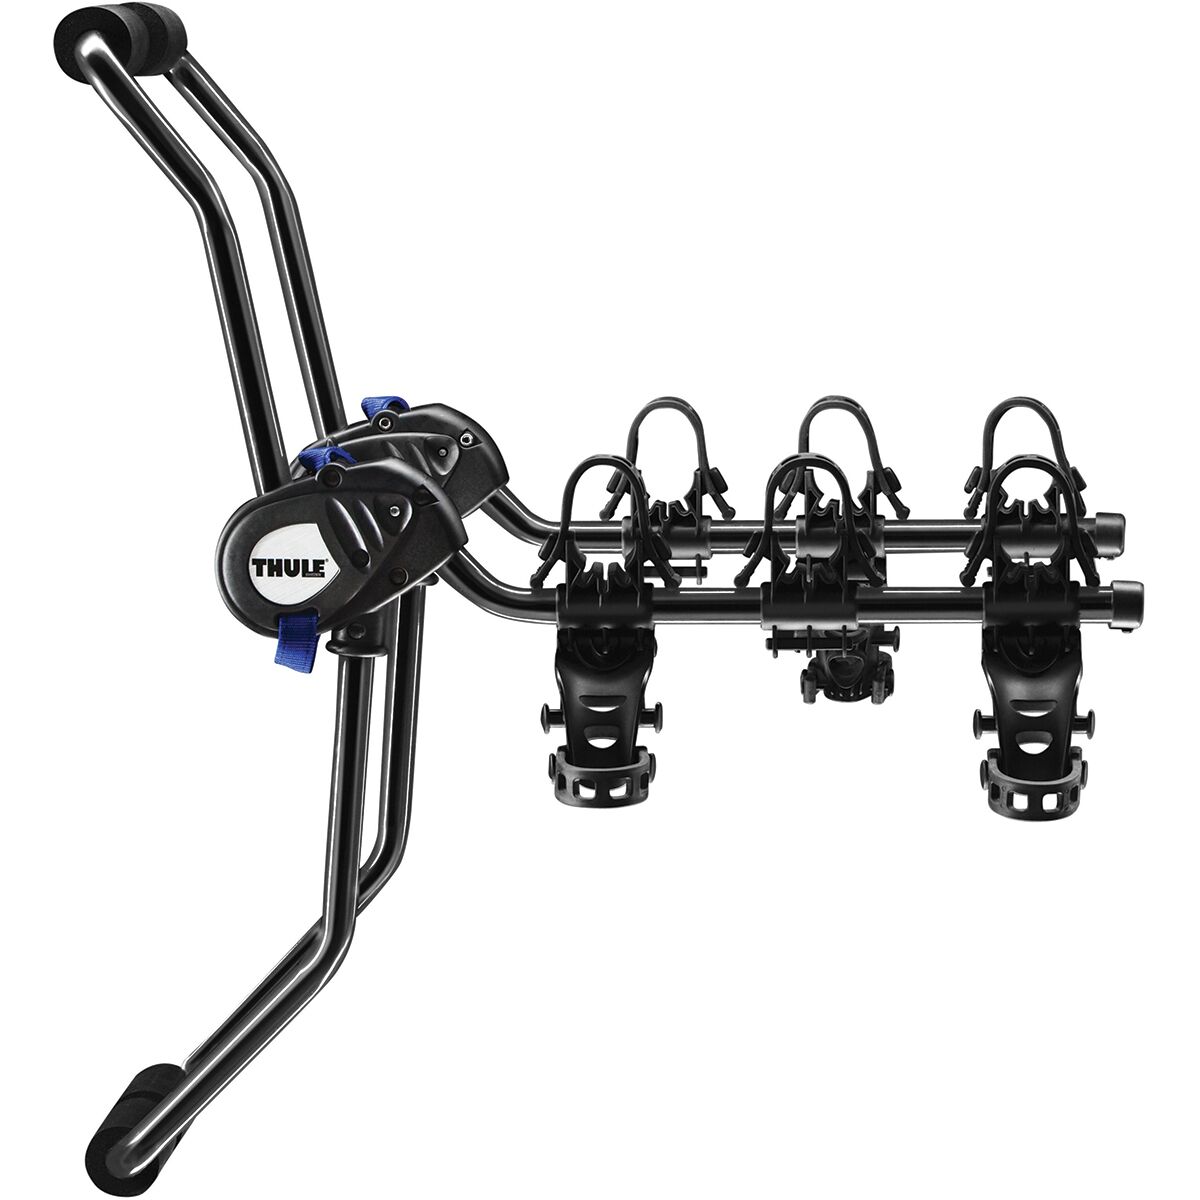 Thule Passage - 3 Bike Strap Rack with Cradles